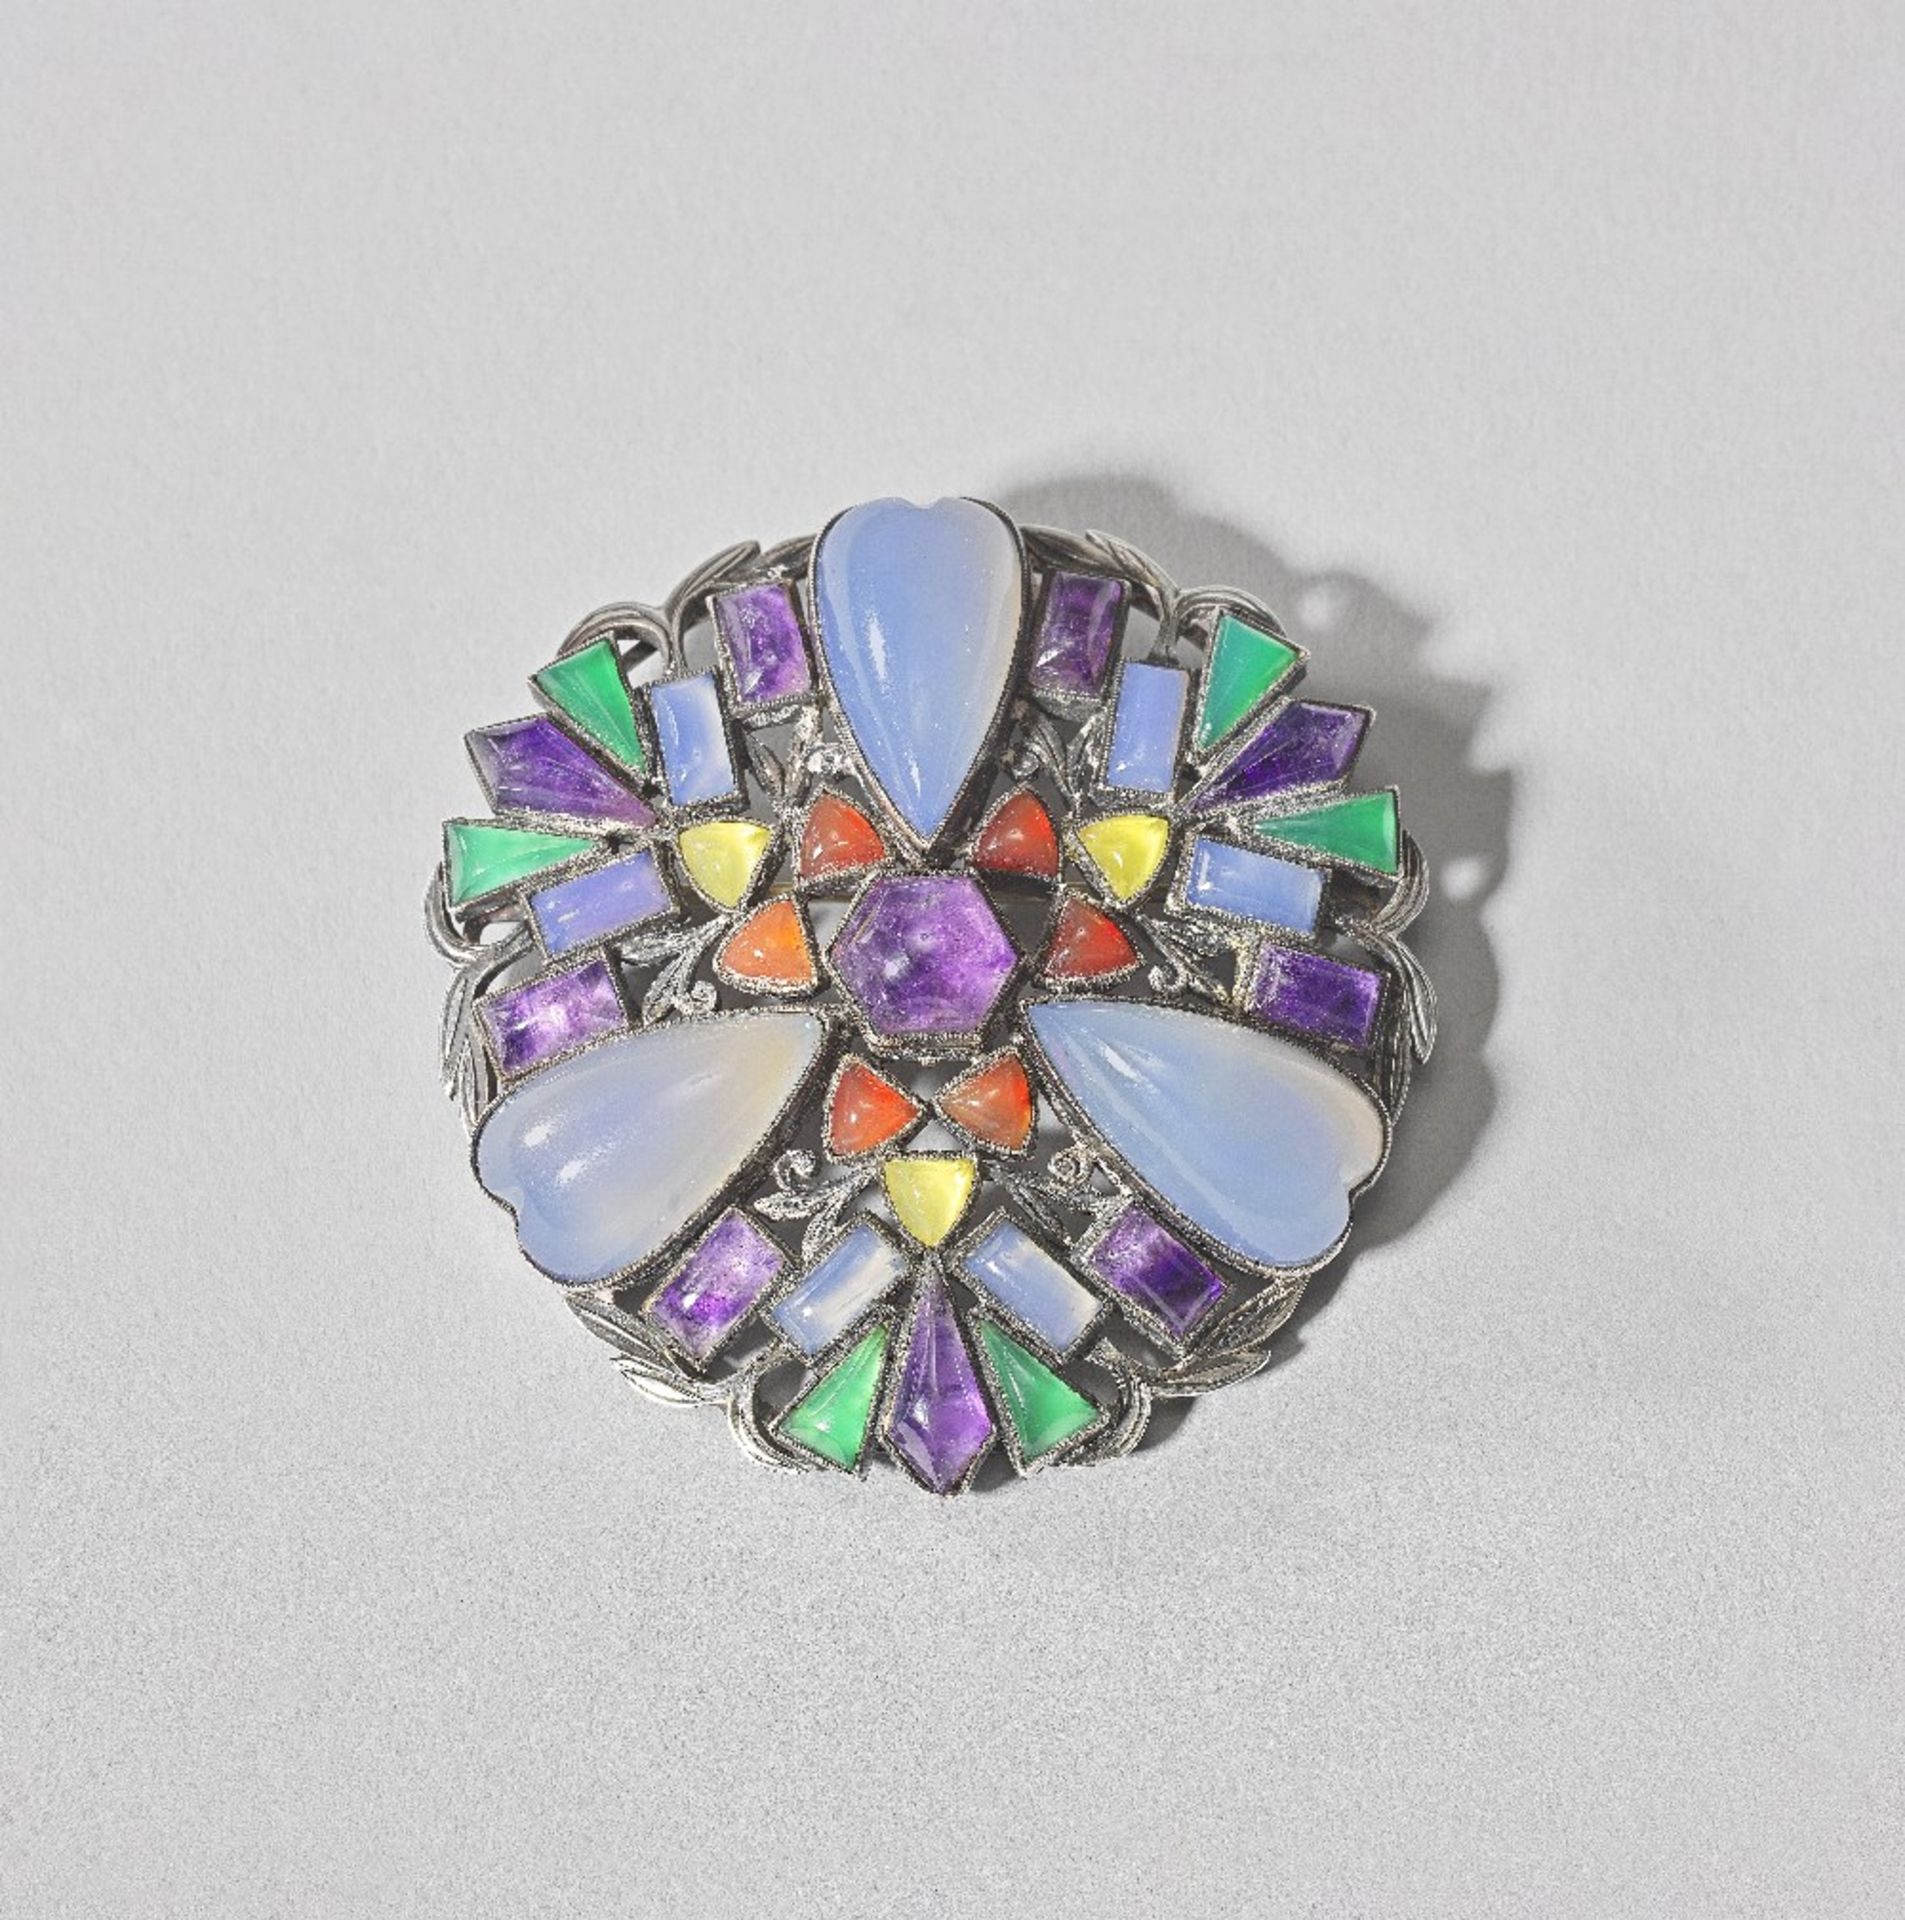 Sibyl Dunlop Brooch set with semi-precious stones, dated 1965